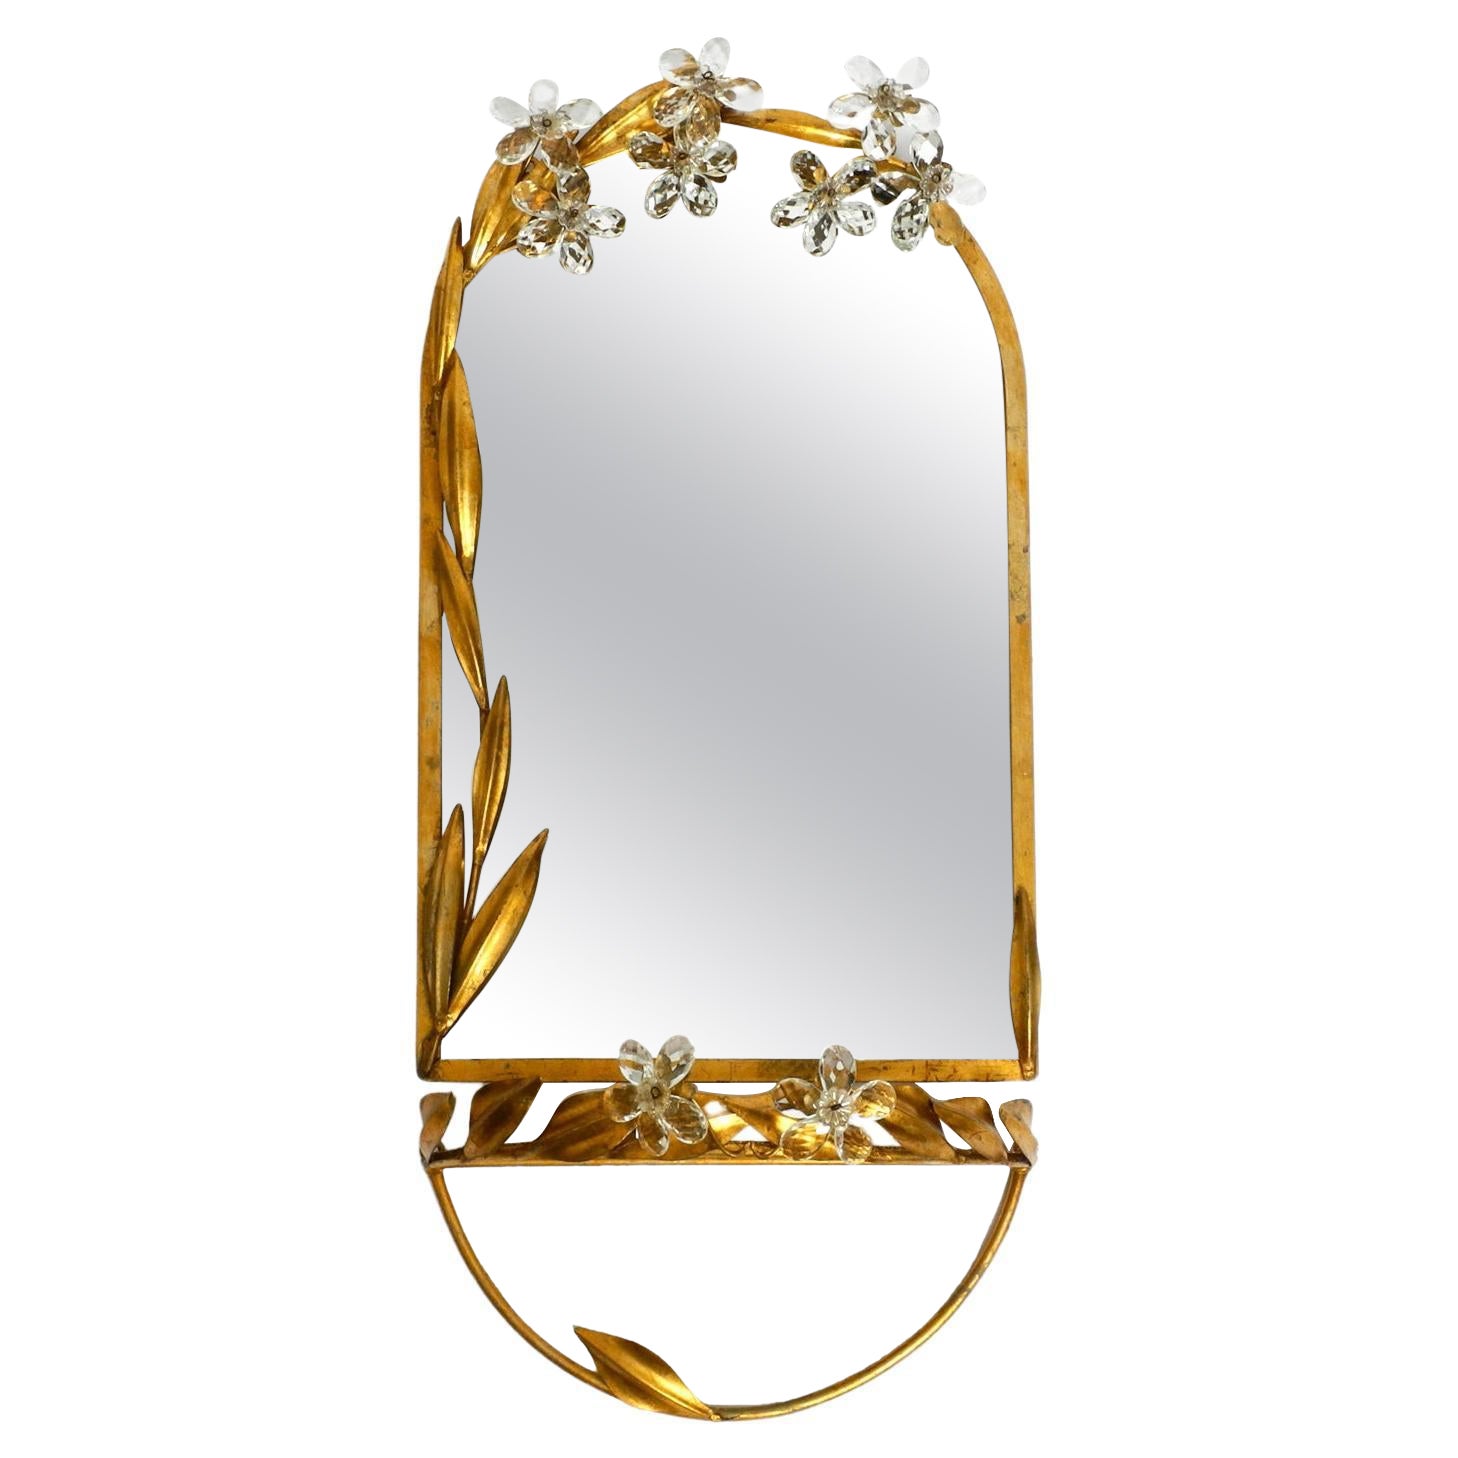 Set of a Floral Iron Wall Mirror and Matching Shelf Gold Plated by Banci Firenze For Sale